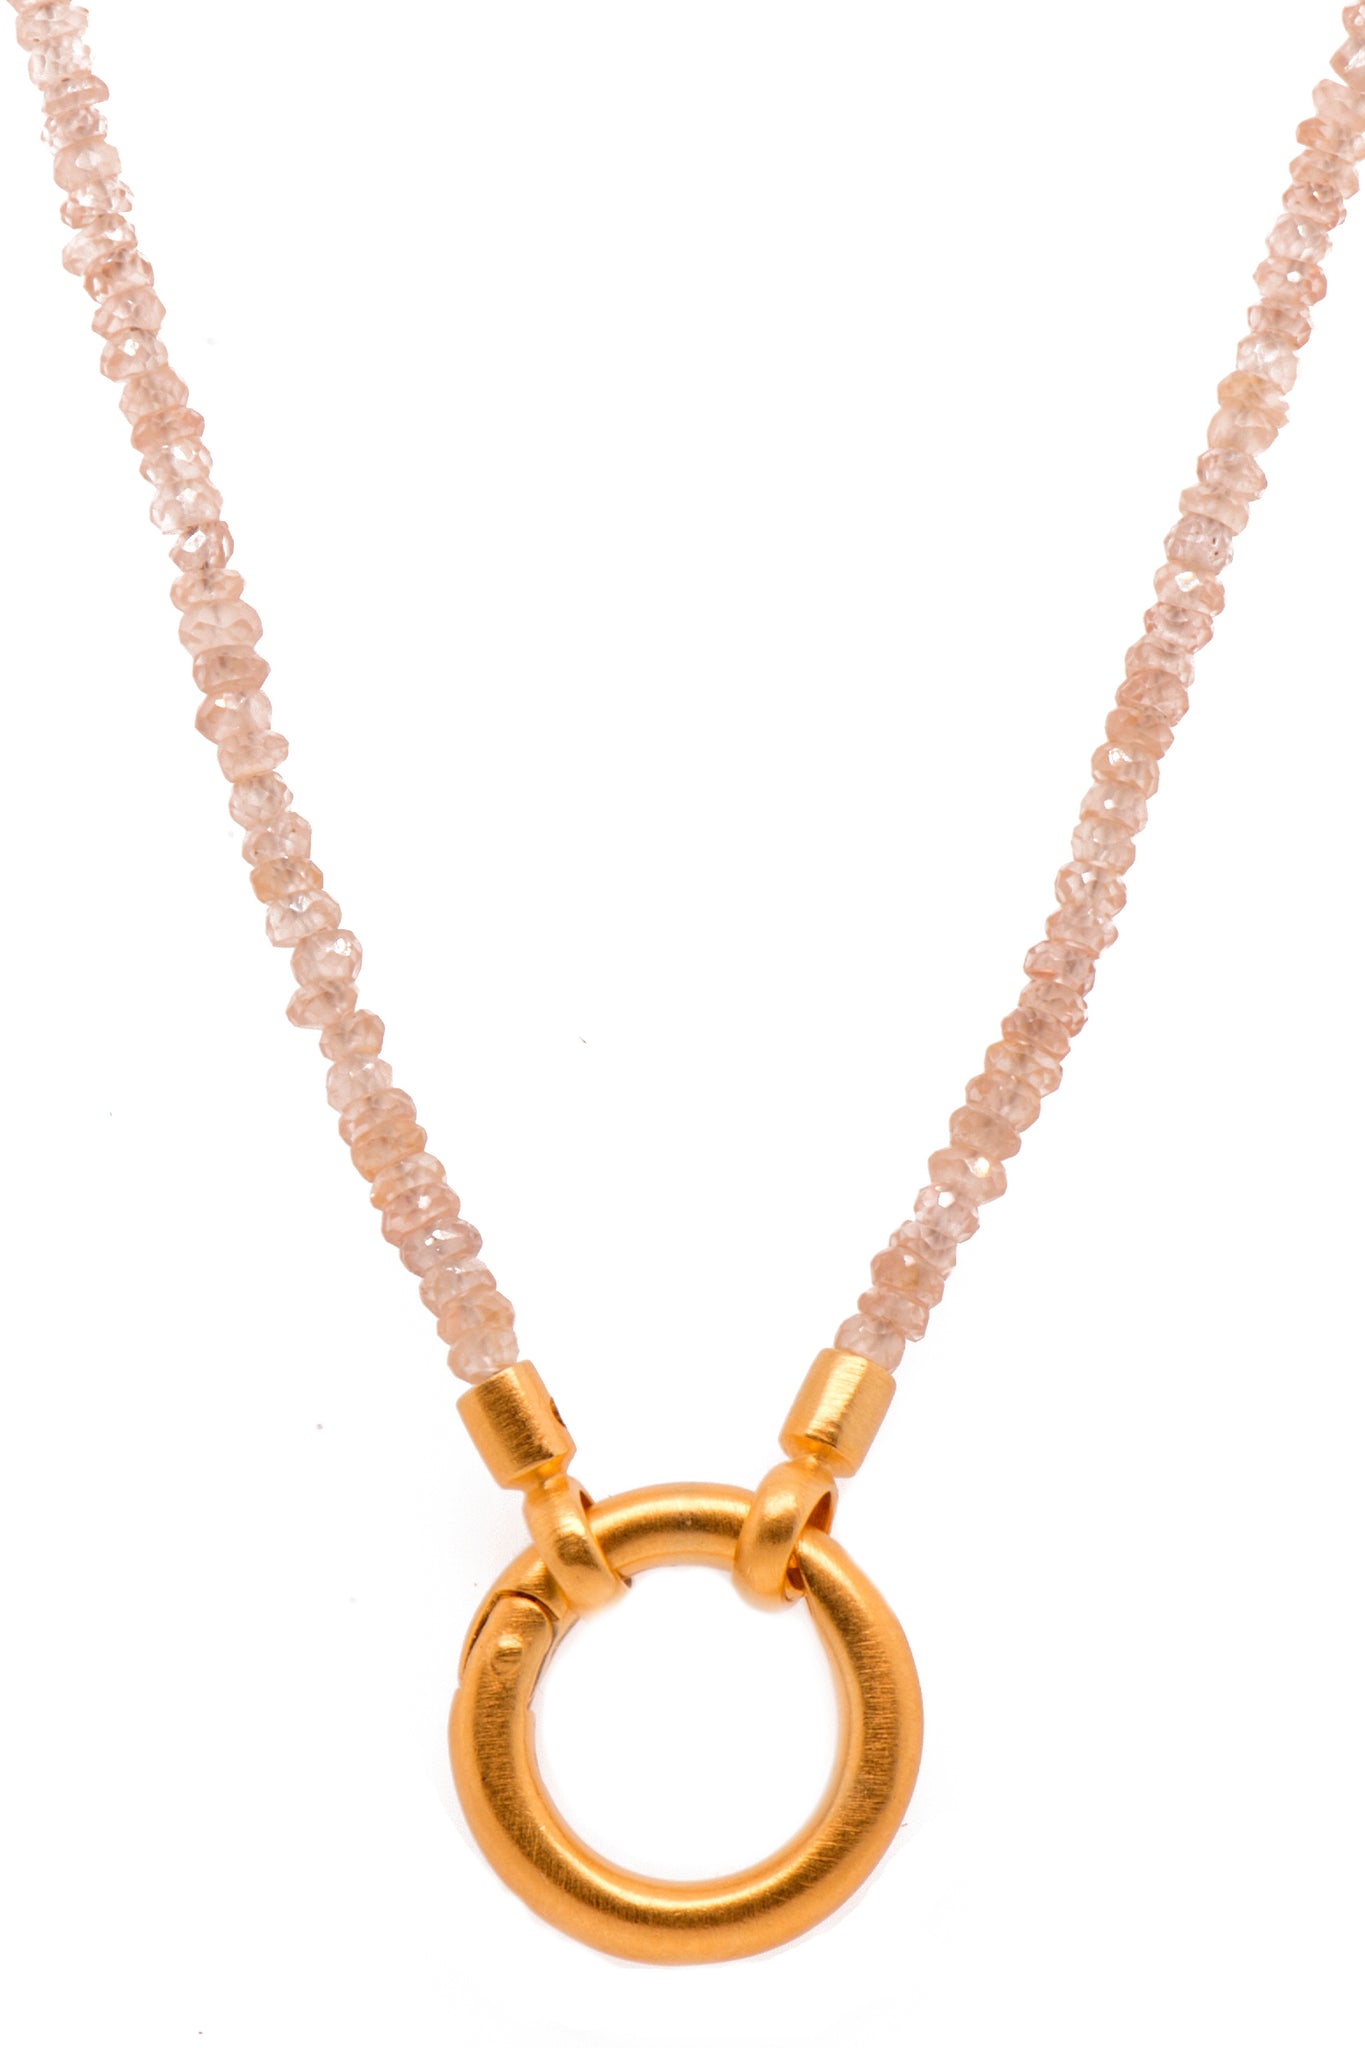 Zircon Necklace 3mm With Ring Clasp 24K Fair Trade Gold Vermeil 17"